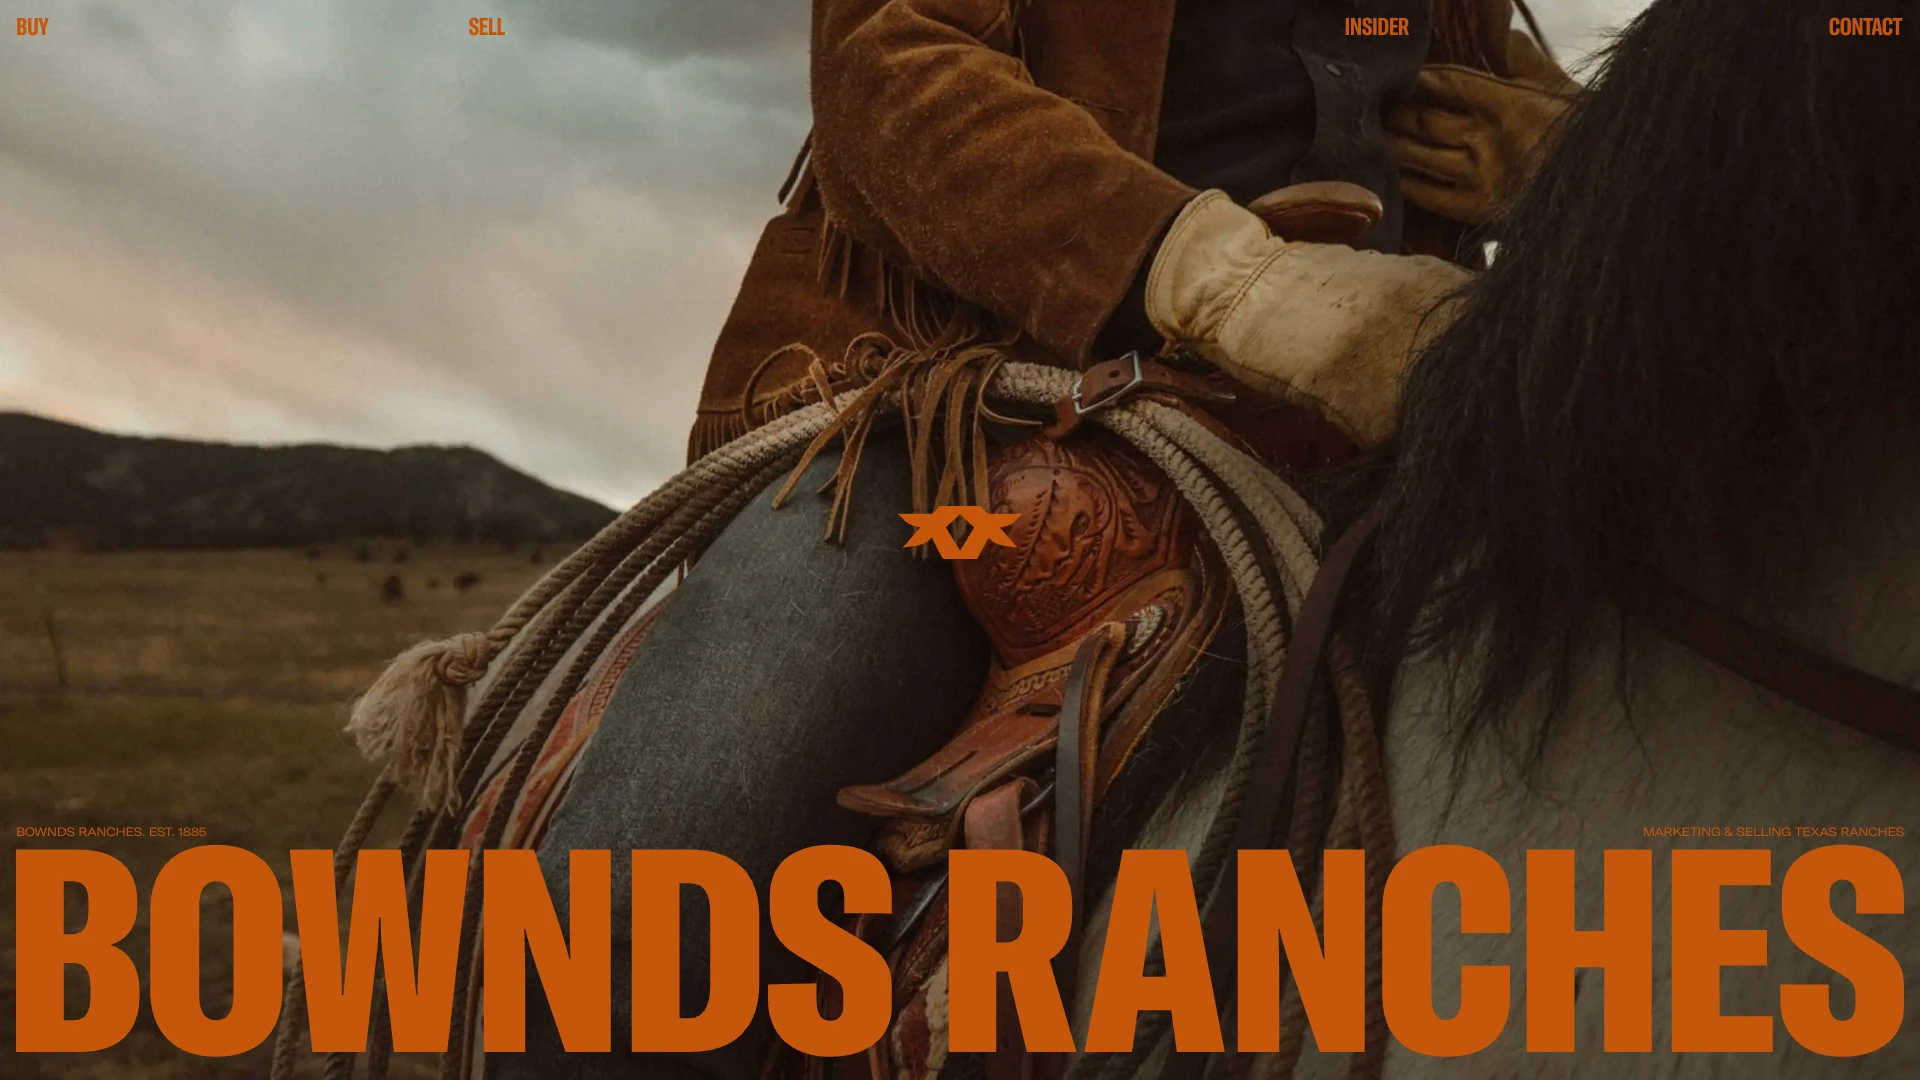 Bownds Ranches